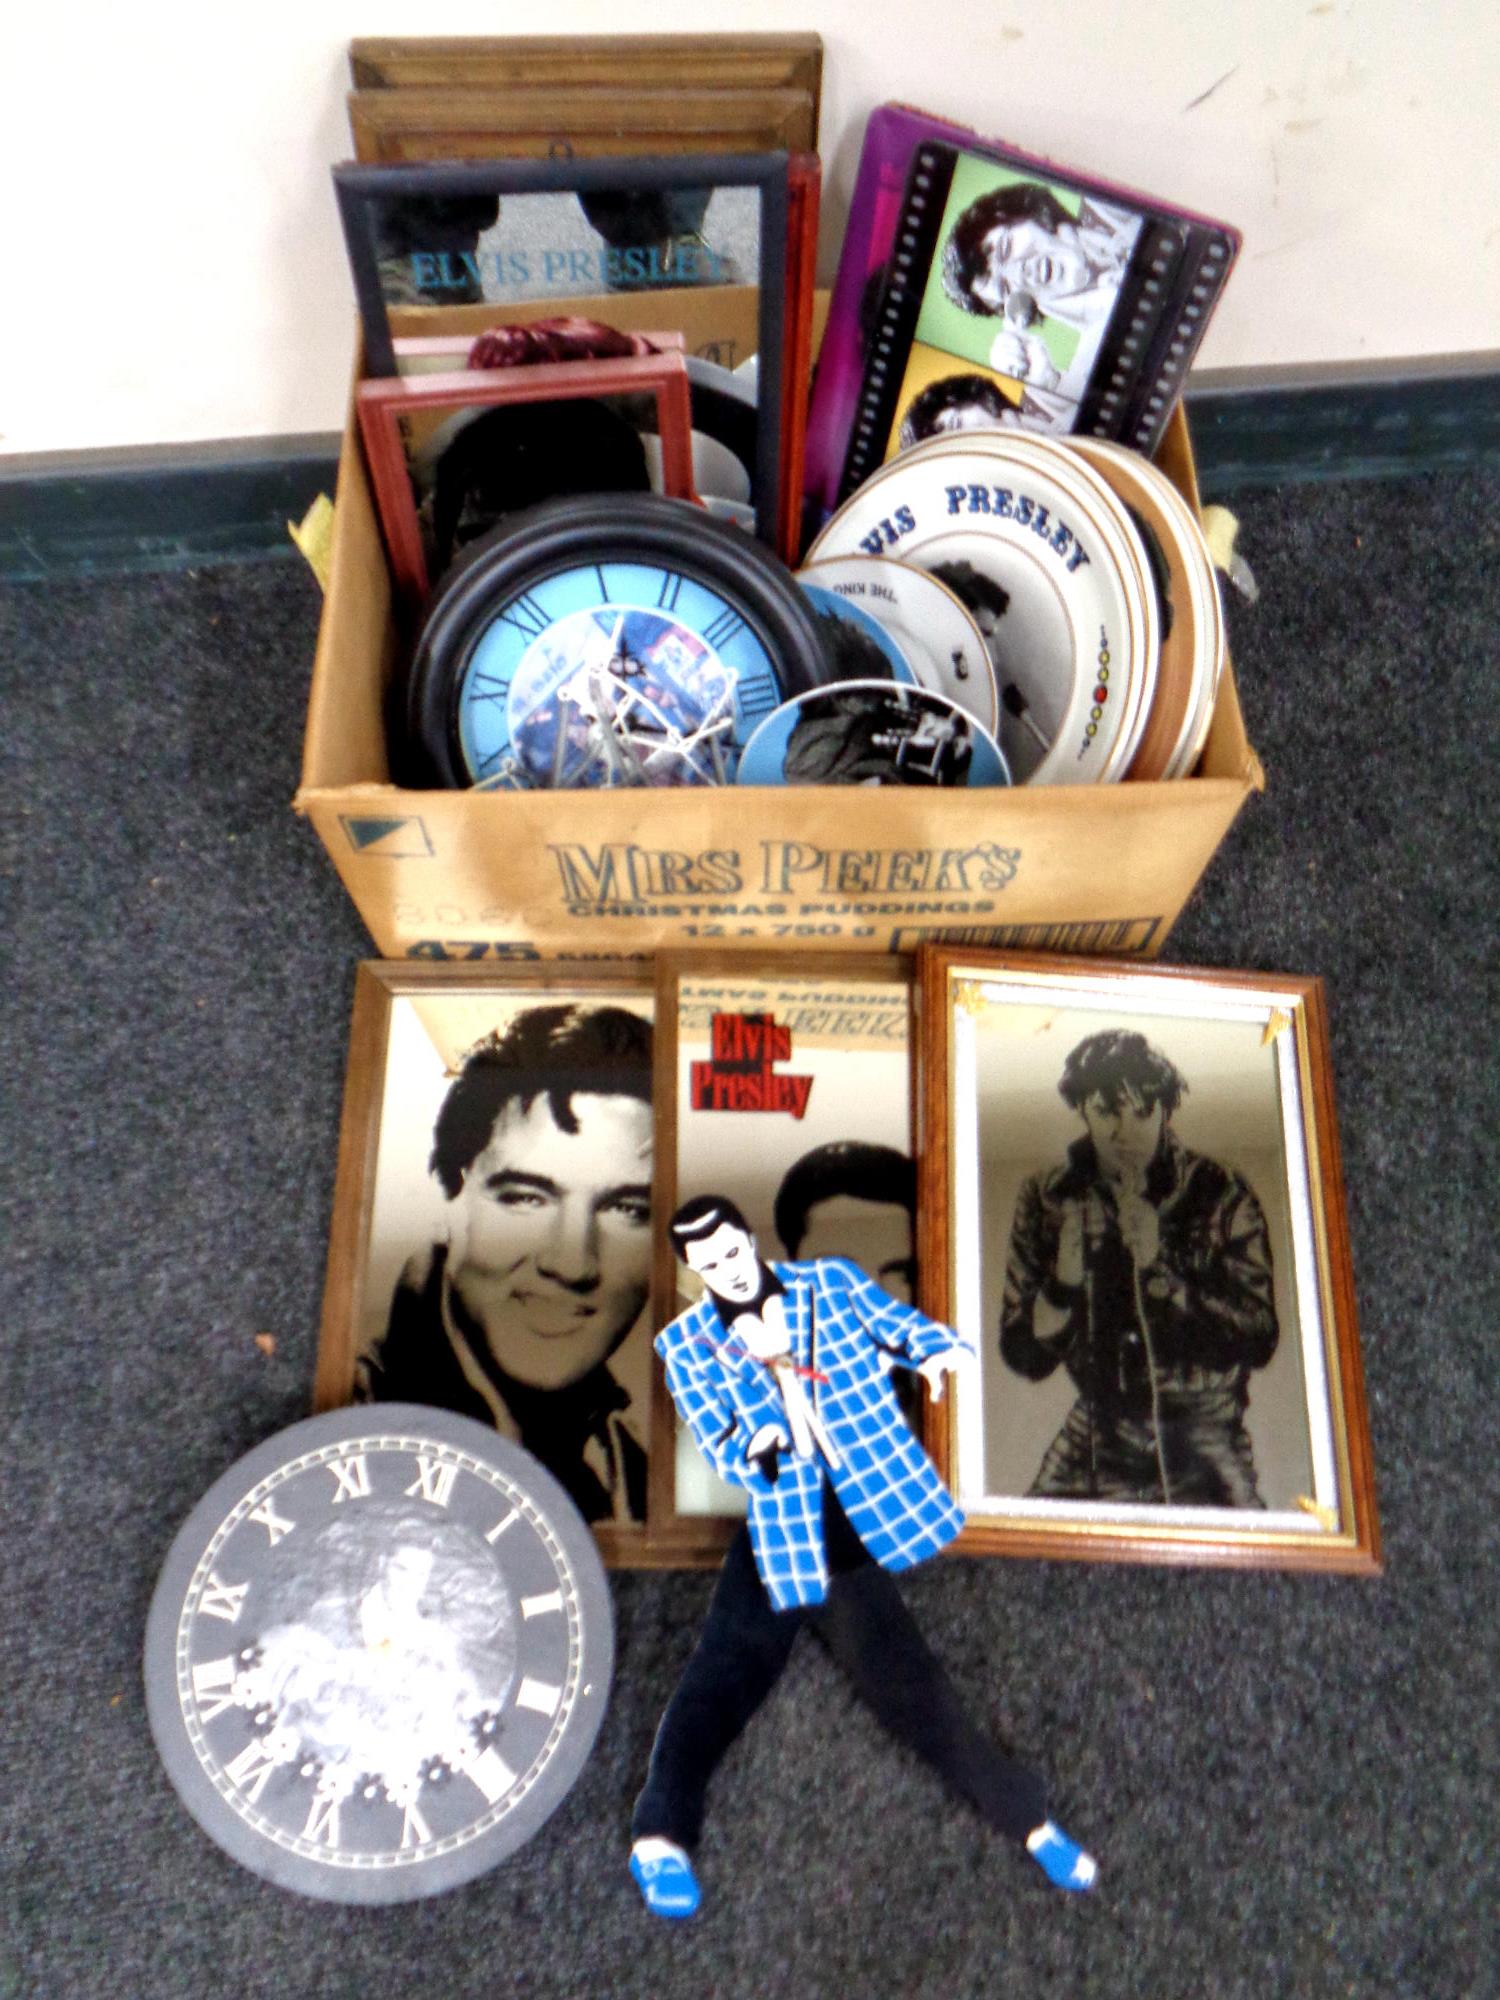 A box containing Elvis Presley memorabilia to include framed picture mirrors, wall clocks,